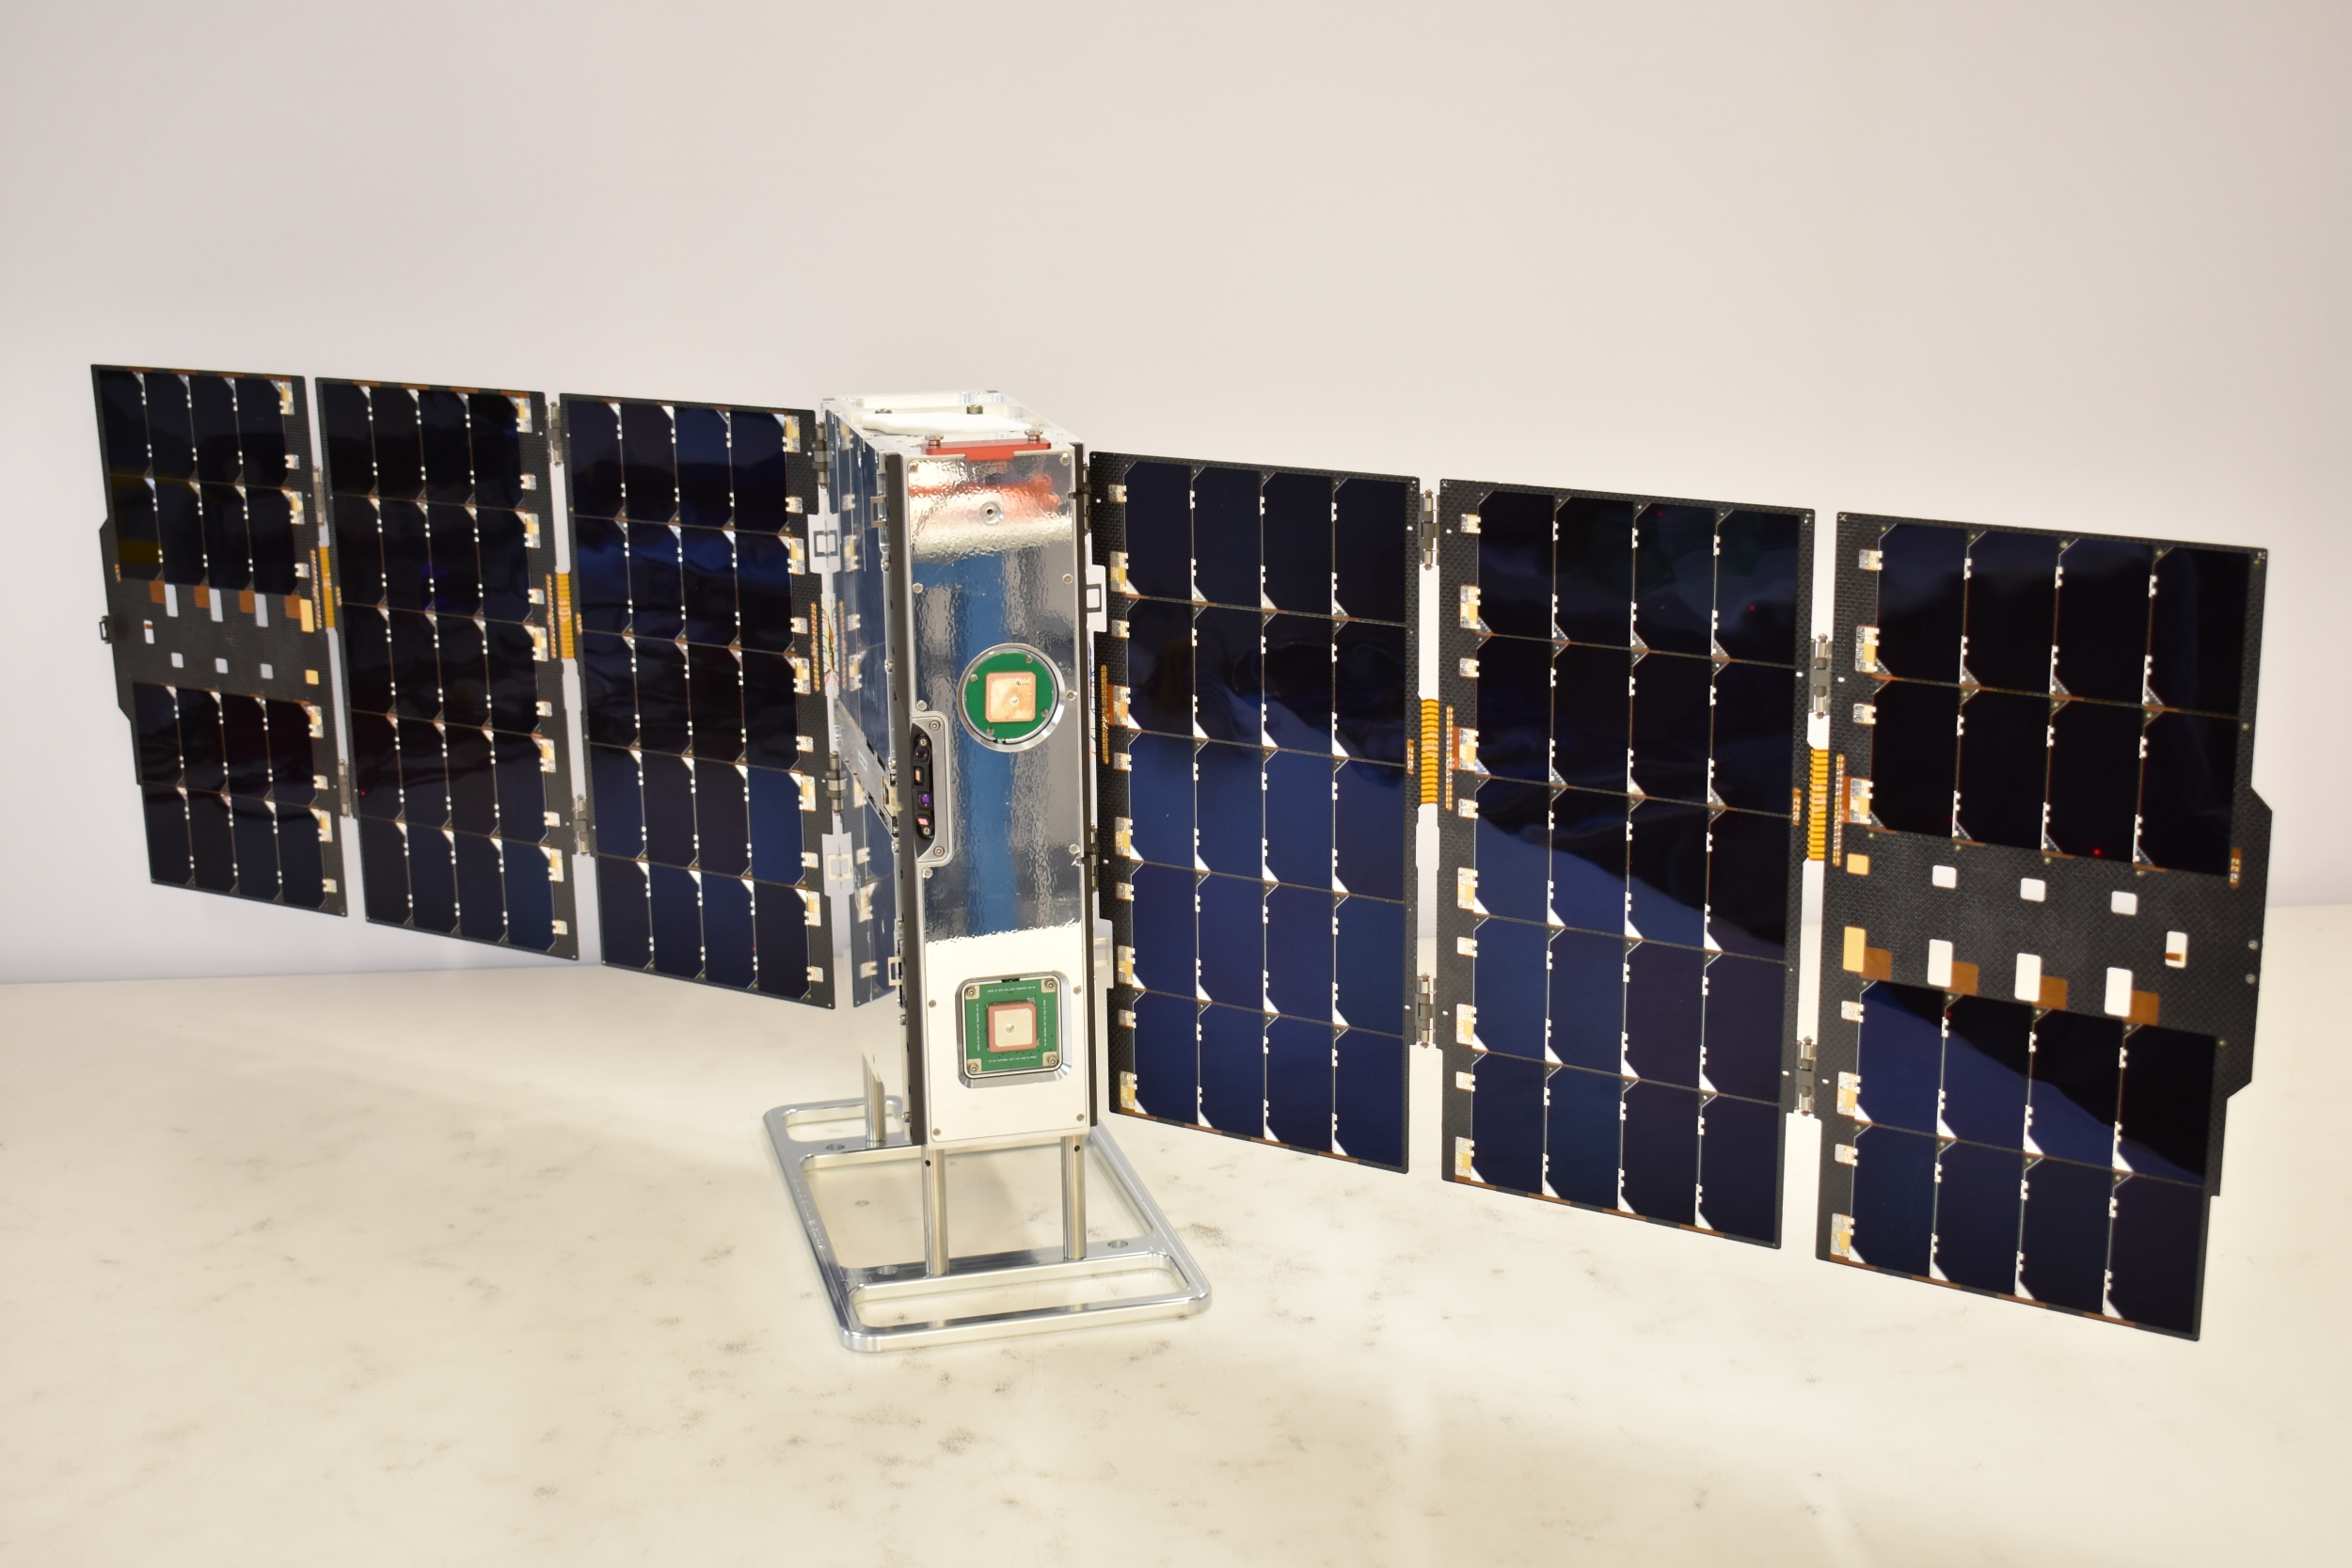 Shown is the full AMS satellite with solar panels deployed. 